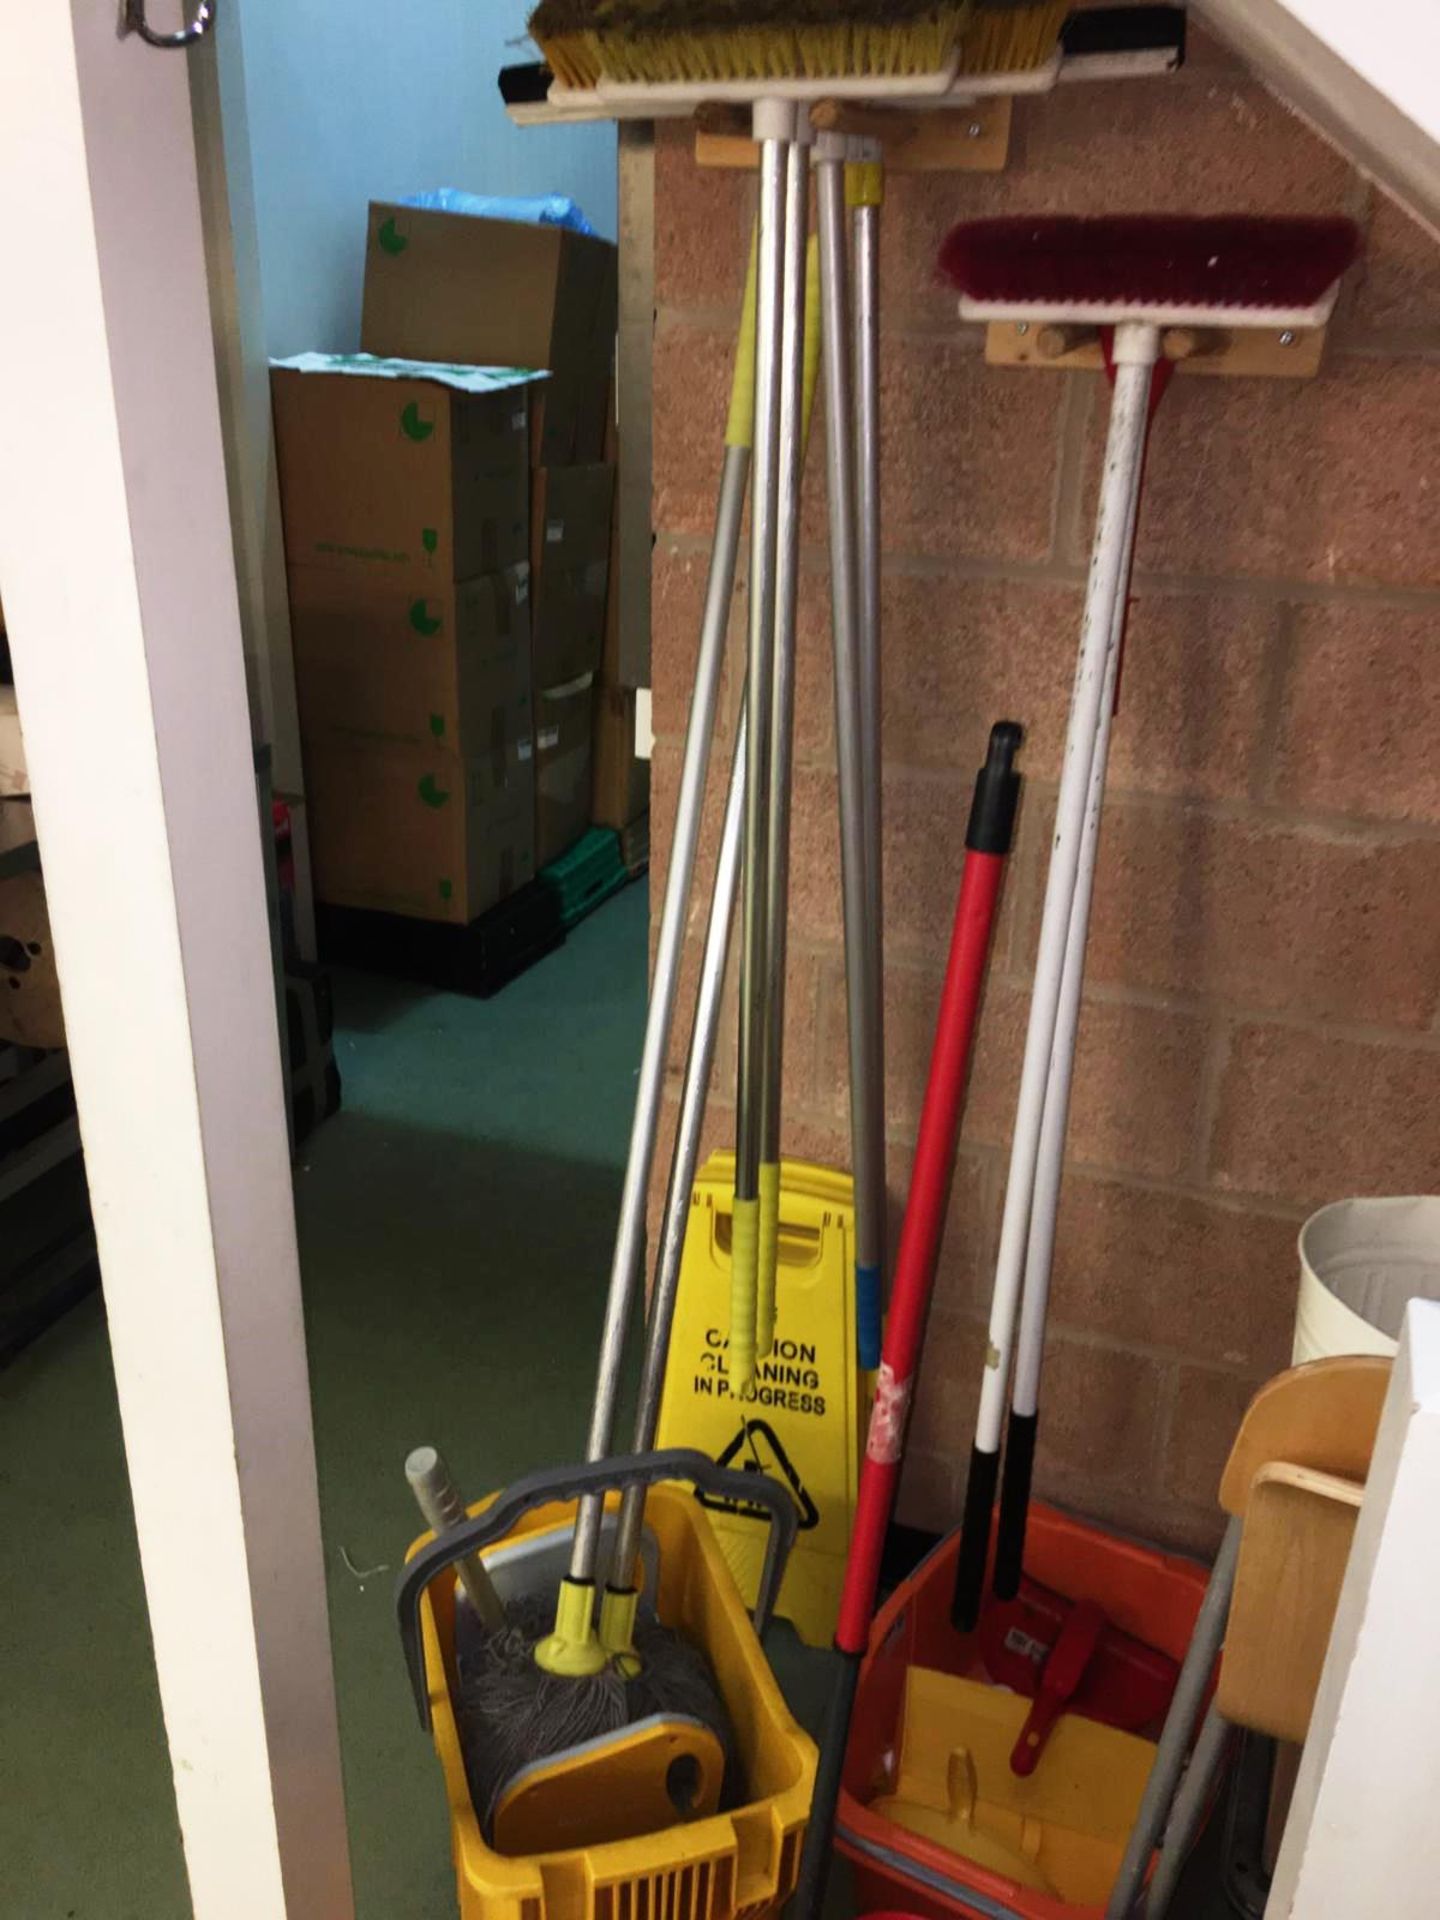 Quantity of Cleaning Supplies & Equipment - As Pictured